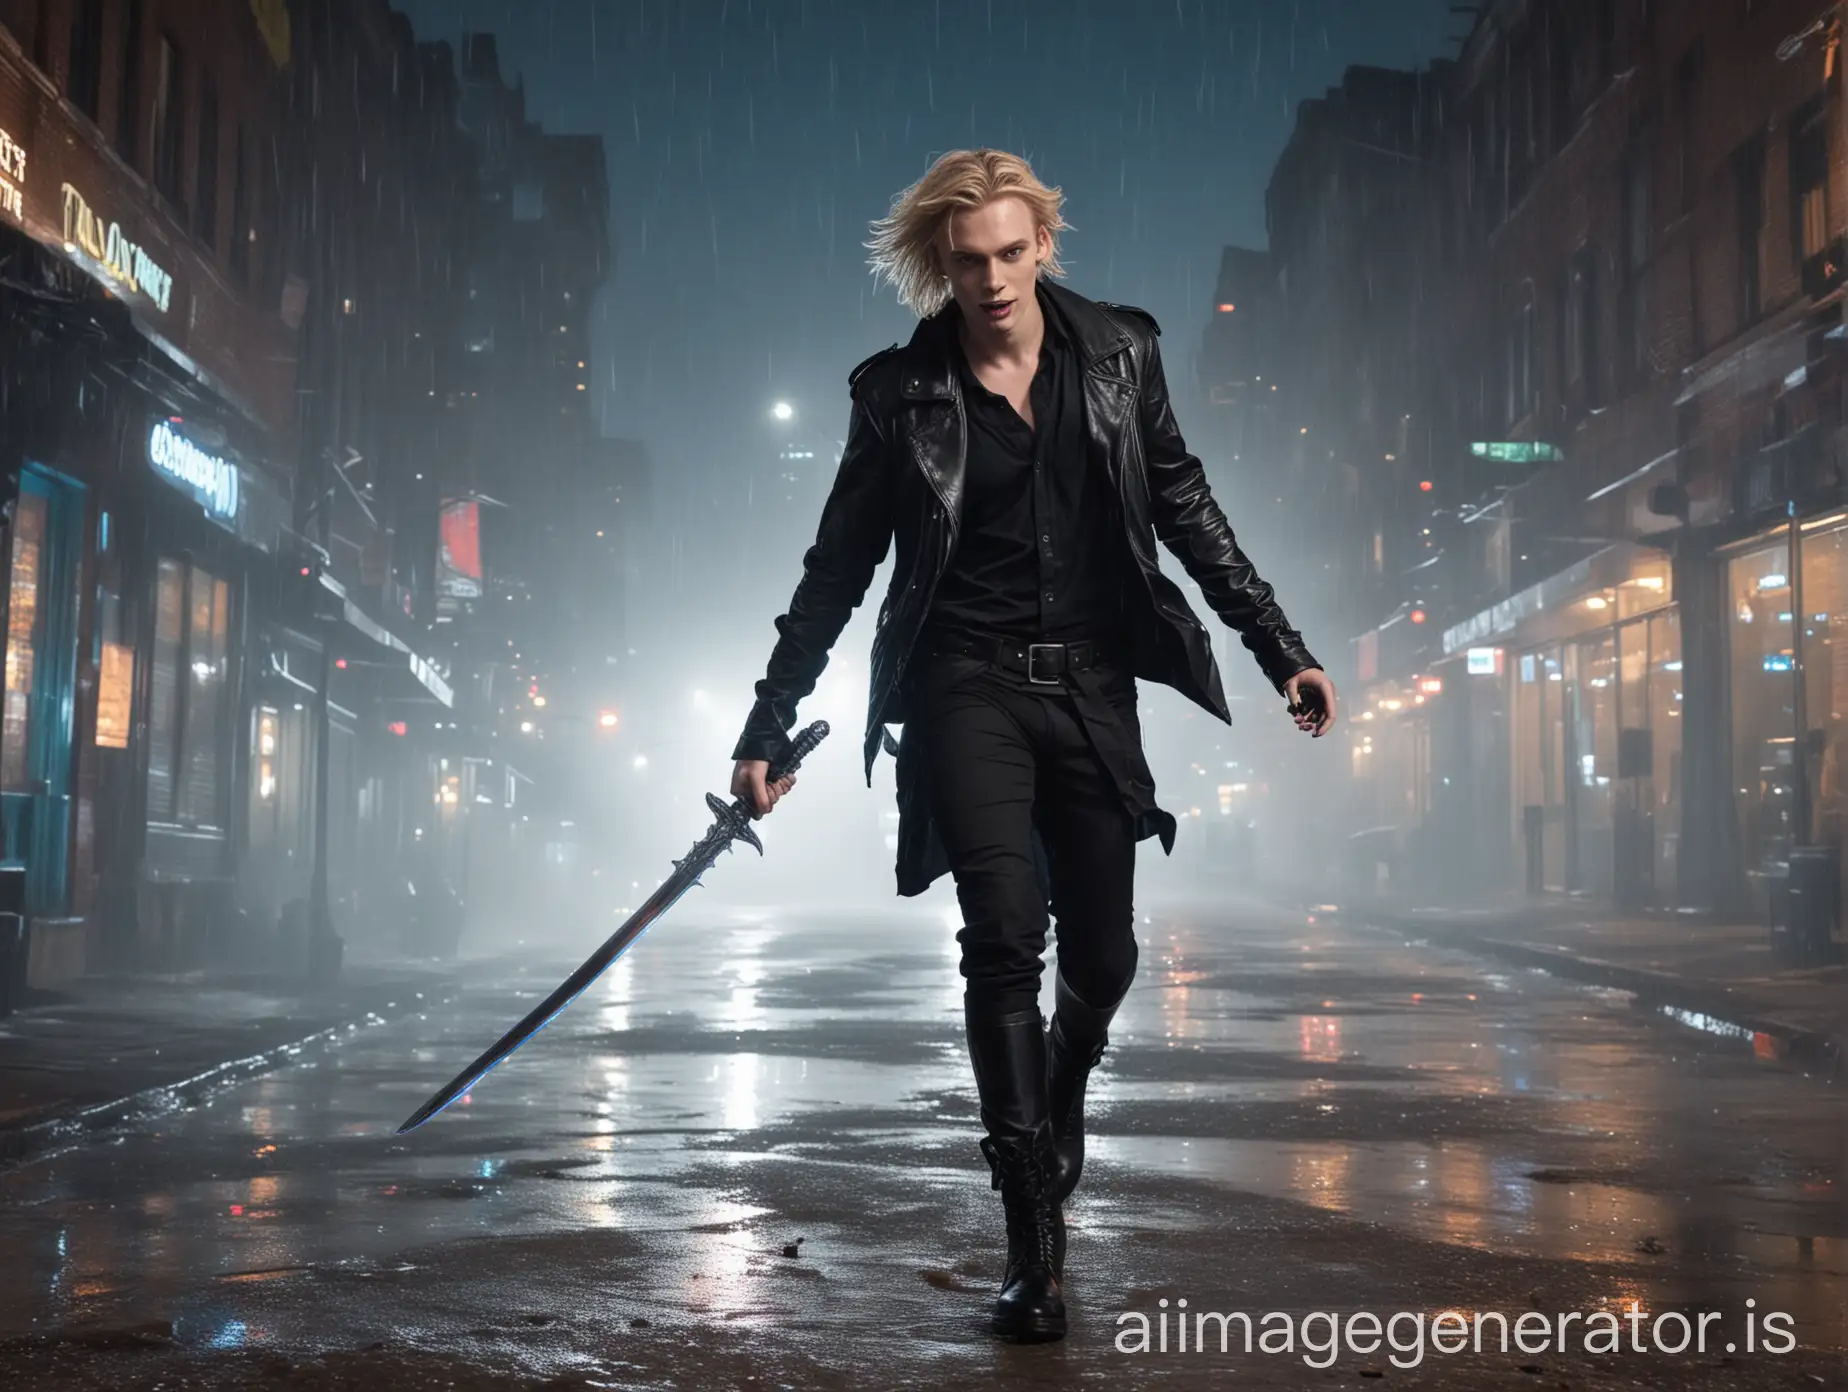 Jamie Campbell Bower face, jumping with a curved glowing glass sword in hand, beautiful bright blue eyes, platinum blonde hair, mischievous smiling face, black unbuttoned shirt chest showing, toronto city white neon nightlights, wearing black army boots, stormy clouds, foggy background, wet brickroad